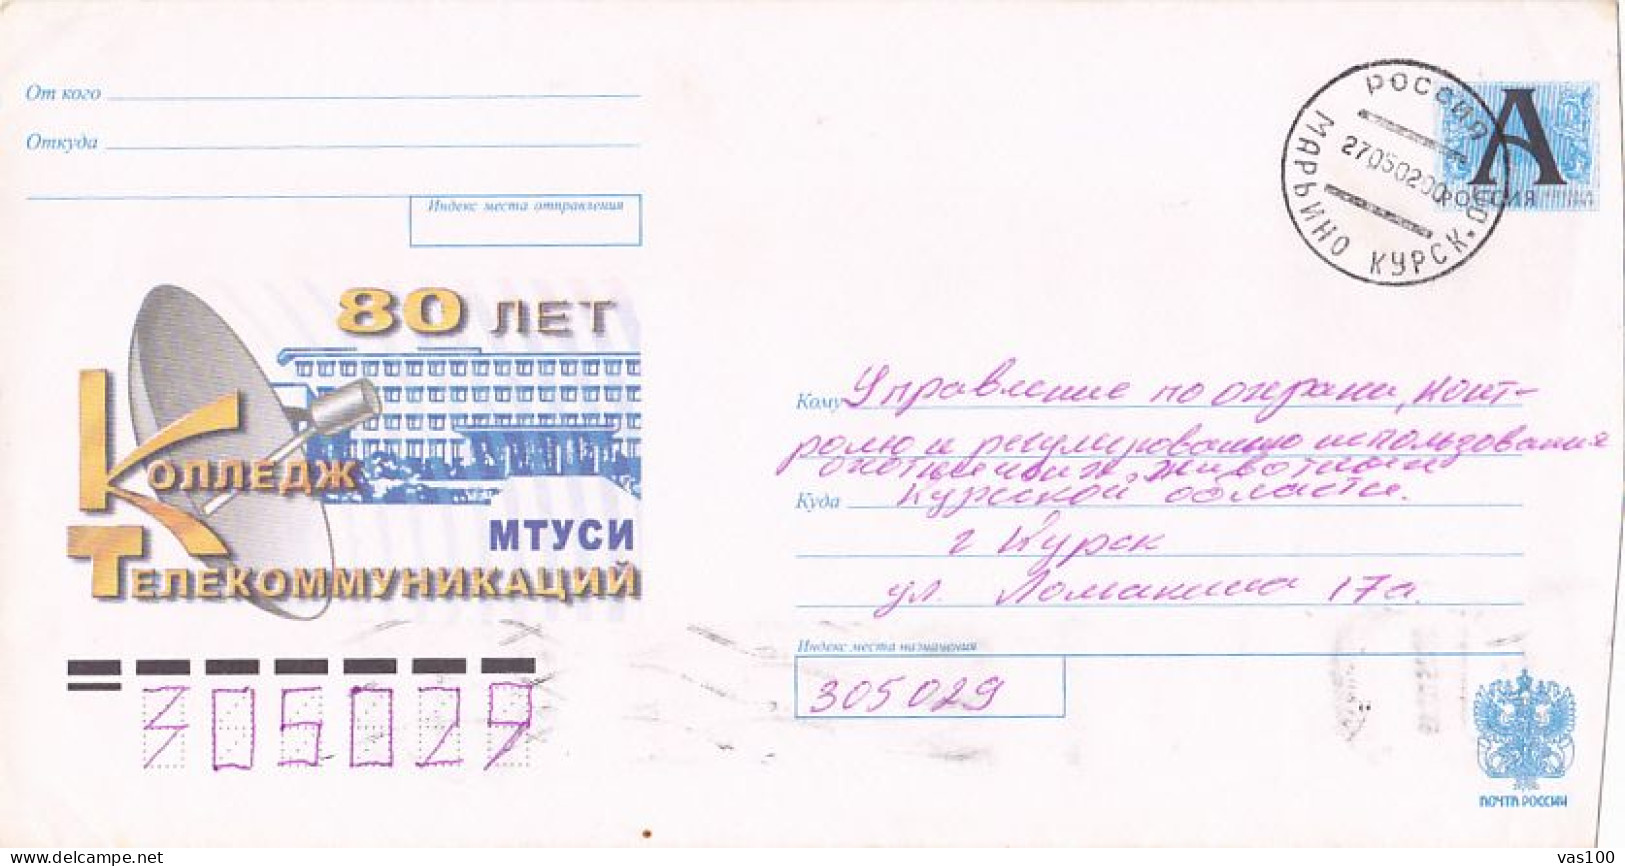 TELECOMMUNICATIONS COLLEGE ANNIVERSARY, COVER STATIONERY, ENTIER POSTAL, 2000, RUSSIA - Ganzsachen